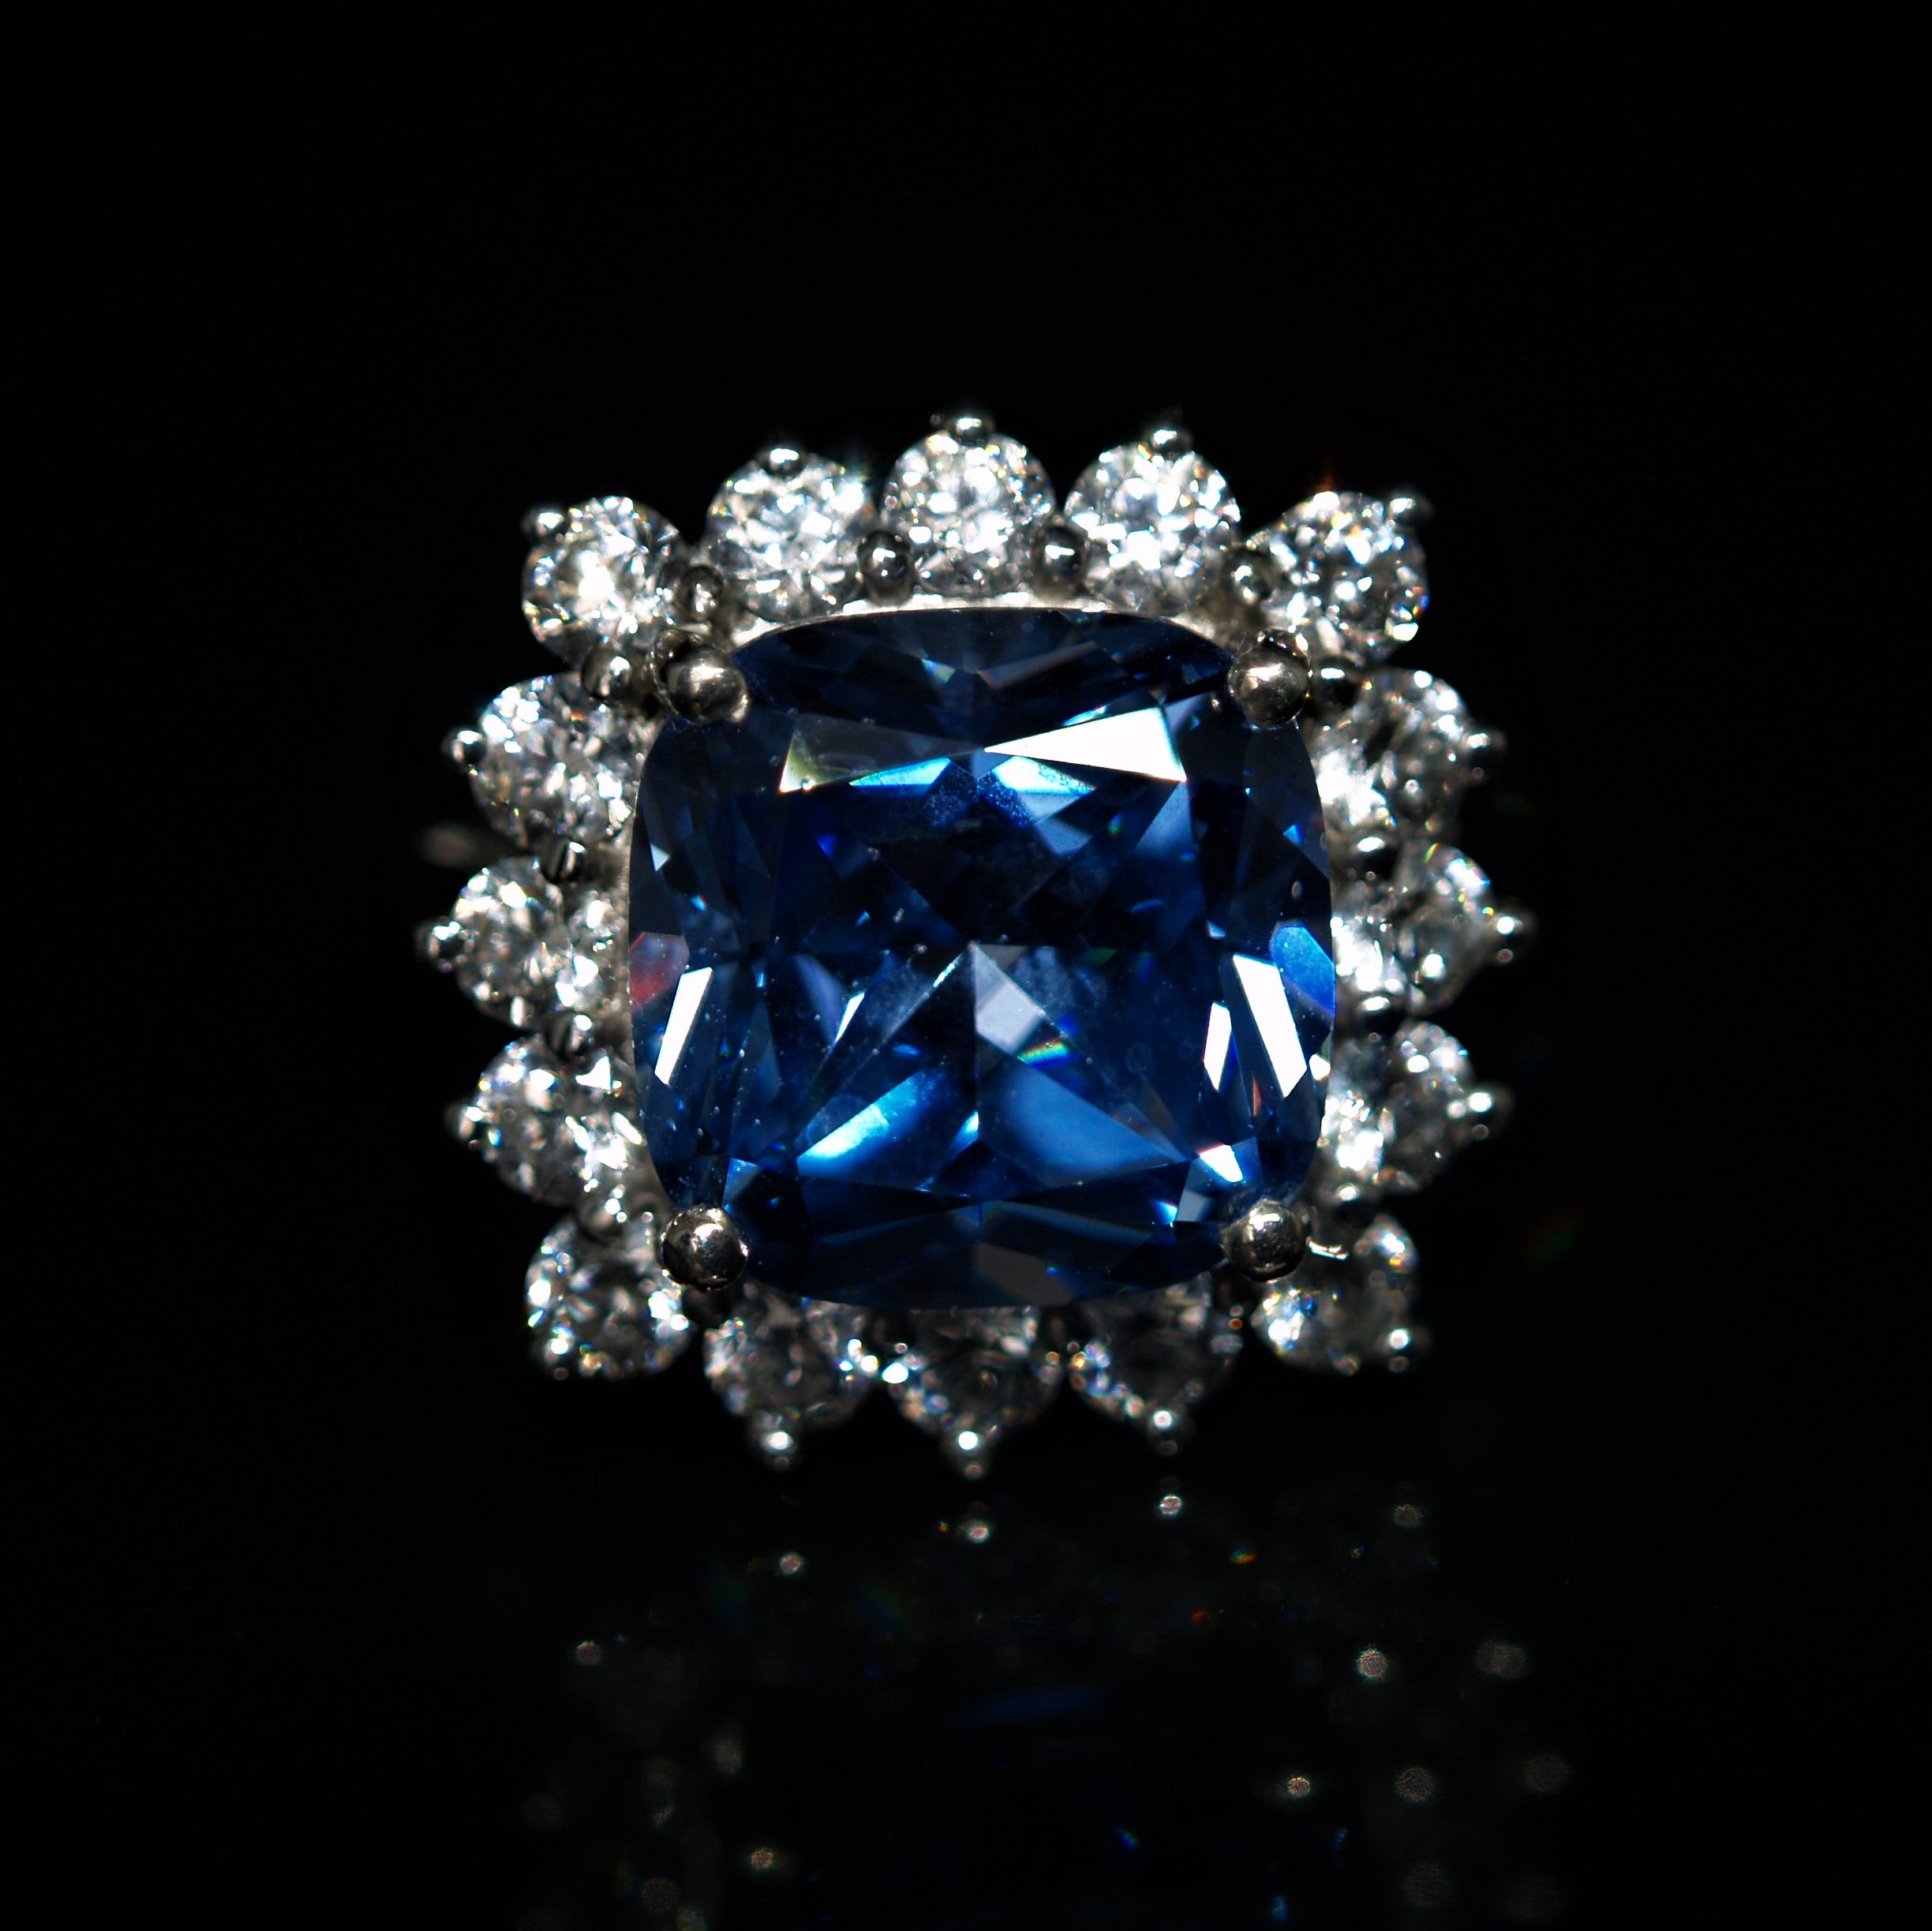 Sterling Silver Blue & White Cubic Zirconia Cocktail Ring.